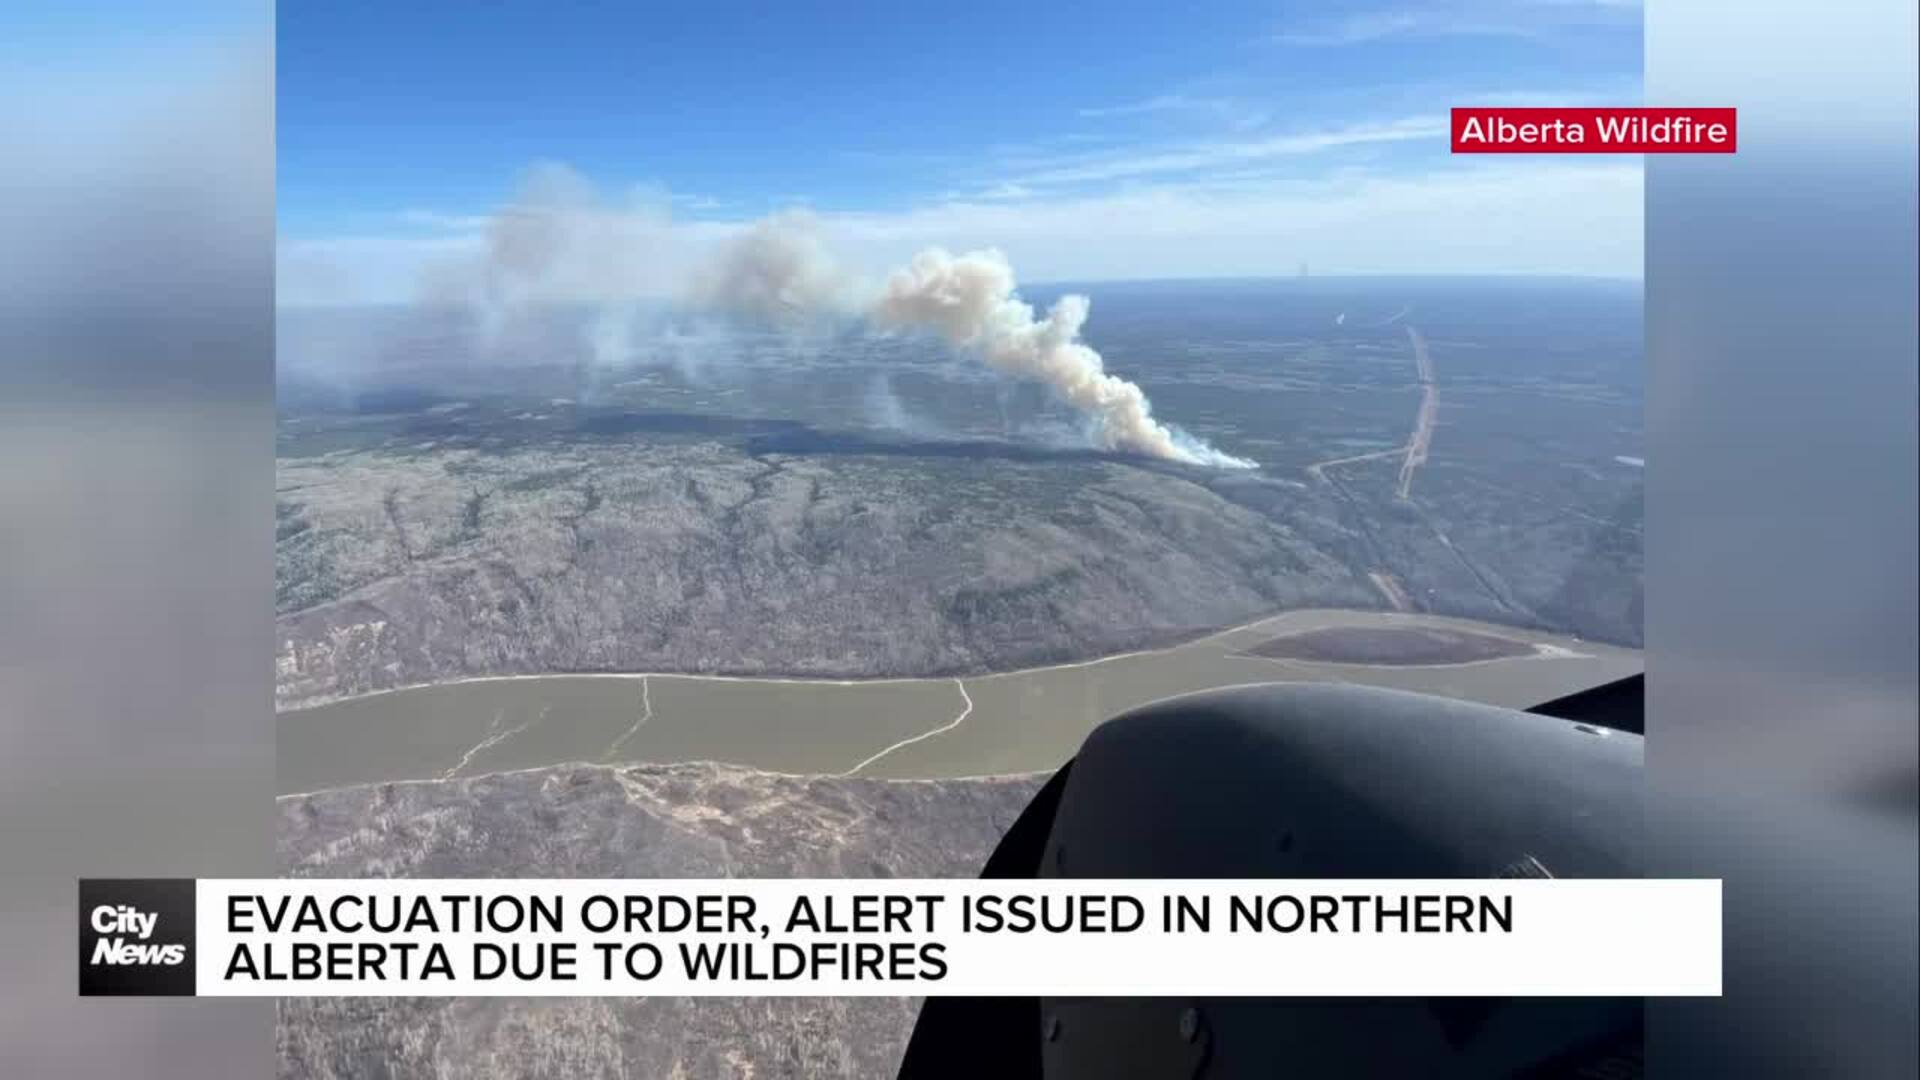 Evacuation order, alert issued in northern Alberta due to wildfires